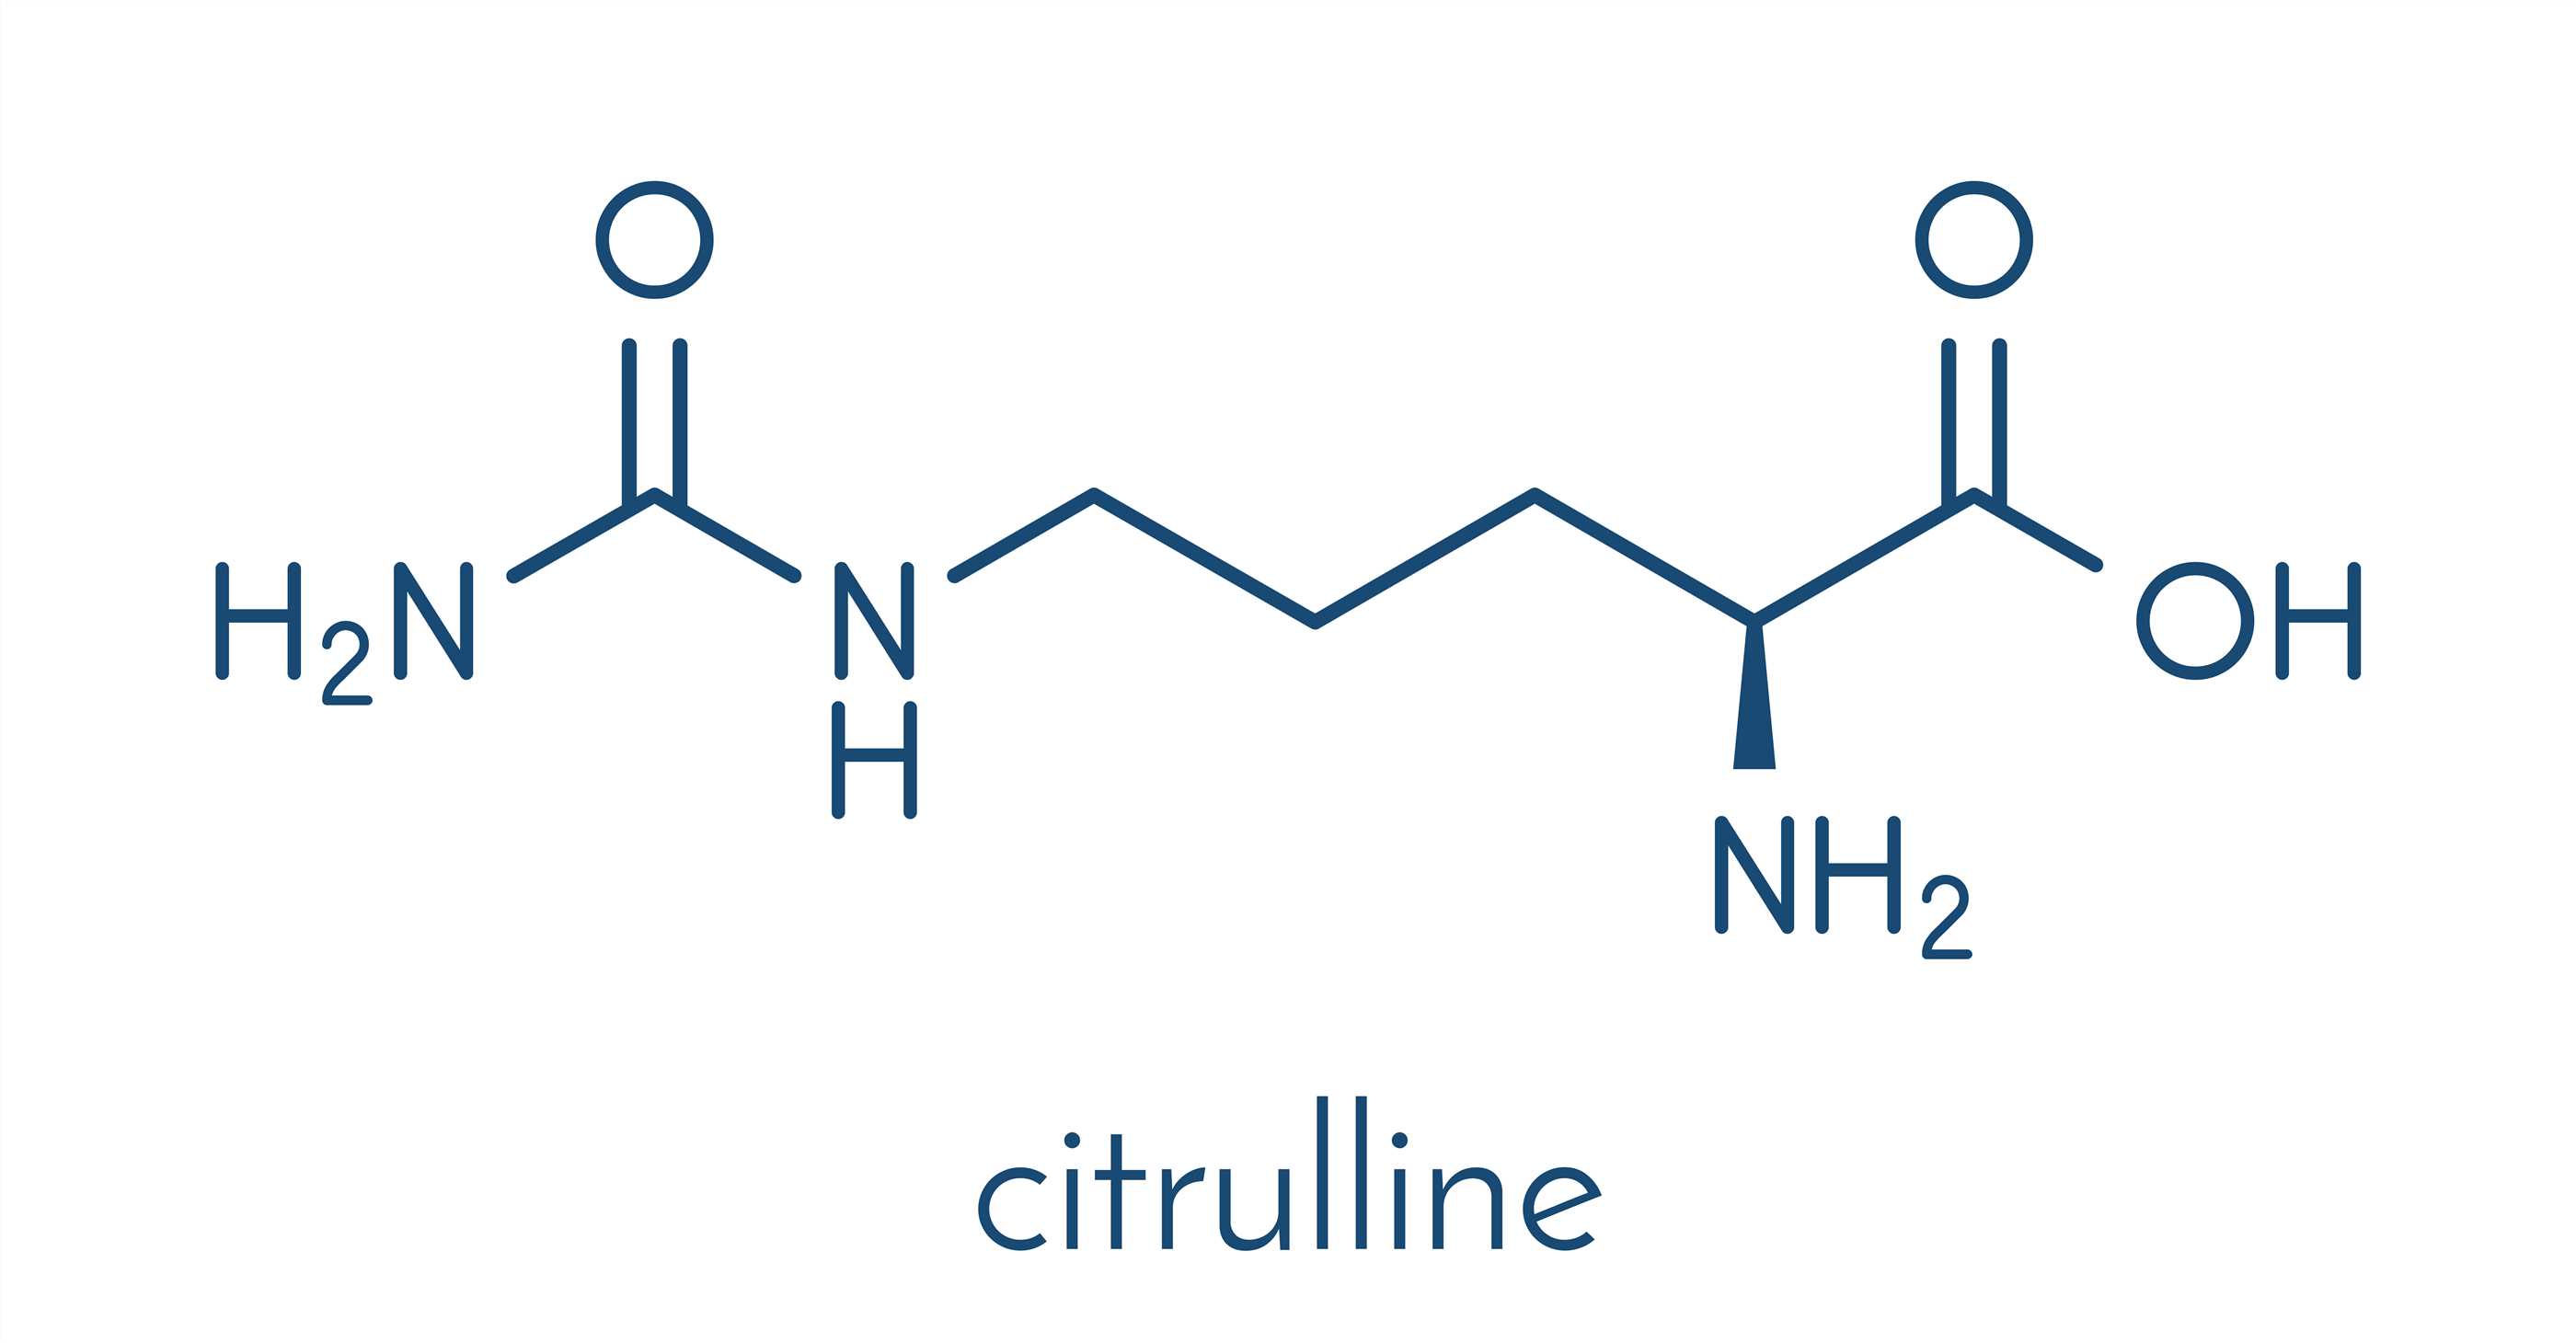 Citrullination-Specific Antibody Introduction